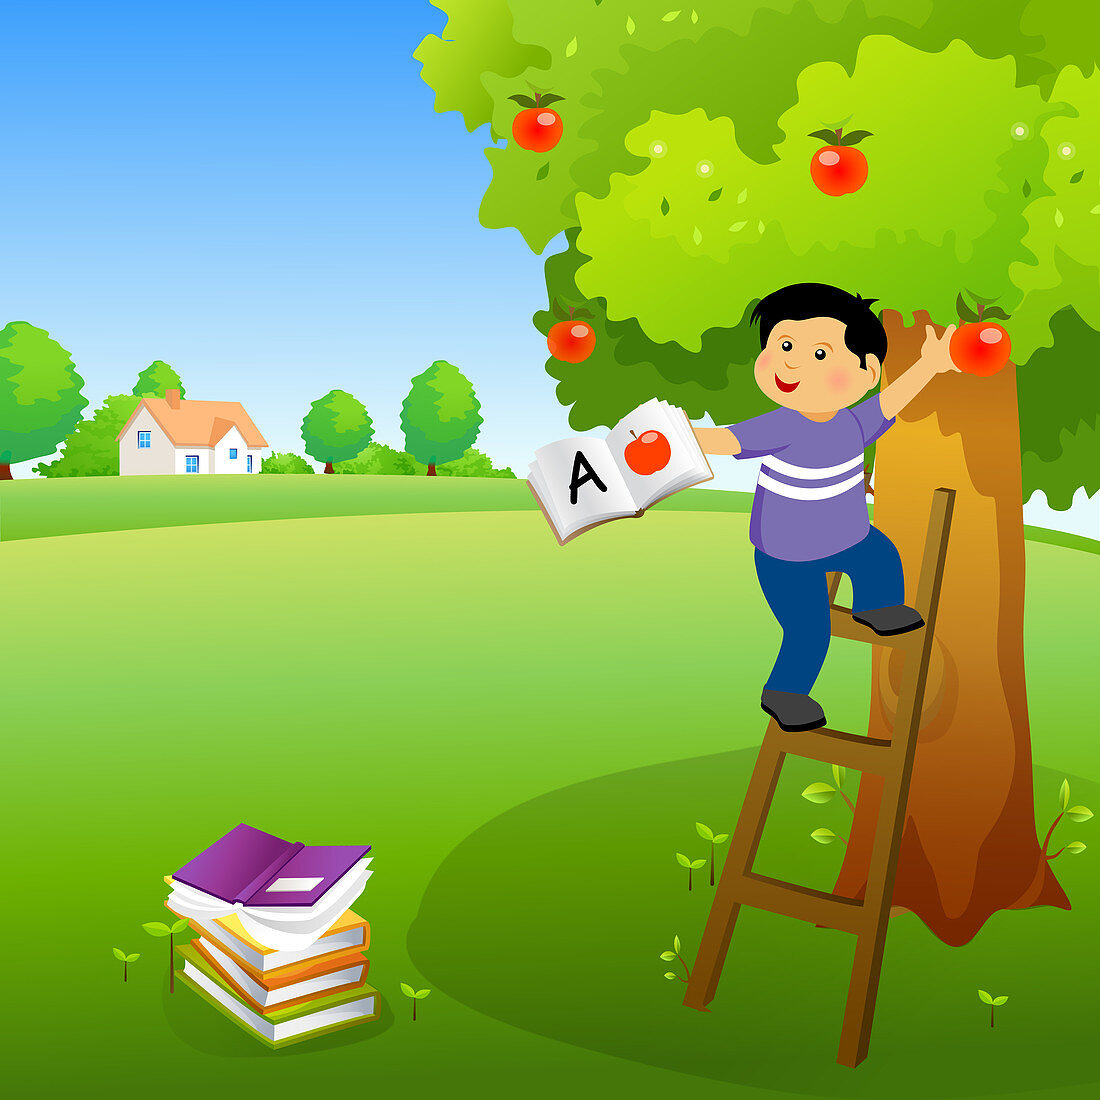 Boy holding a book and climbing an apple tree, illustration